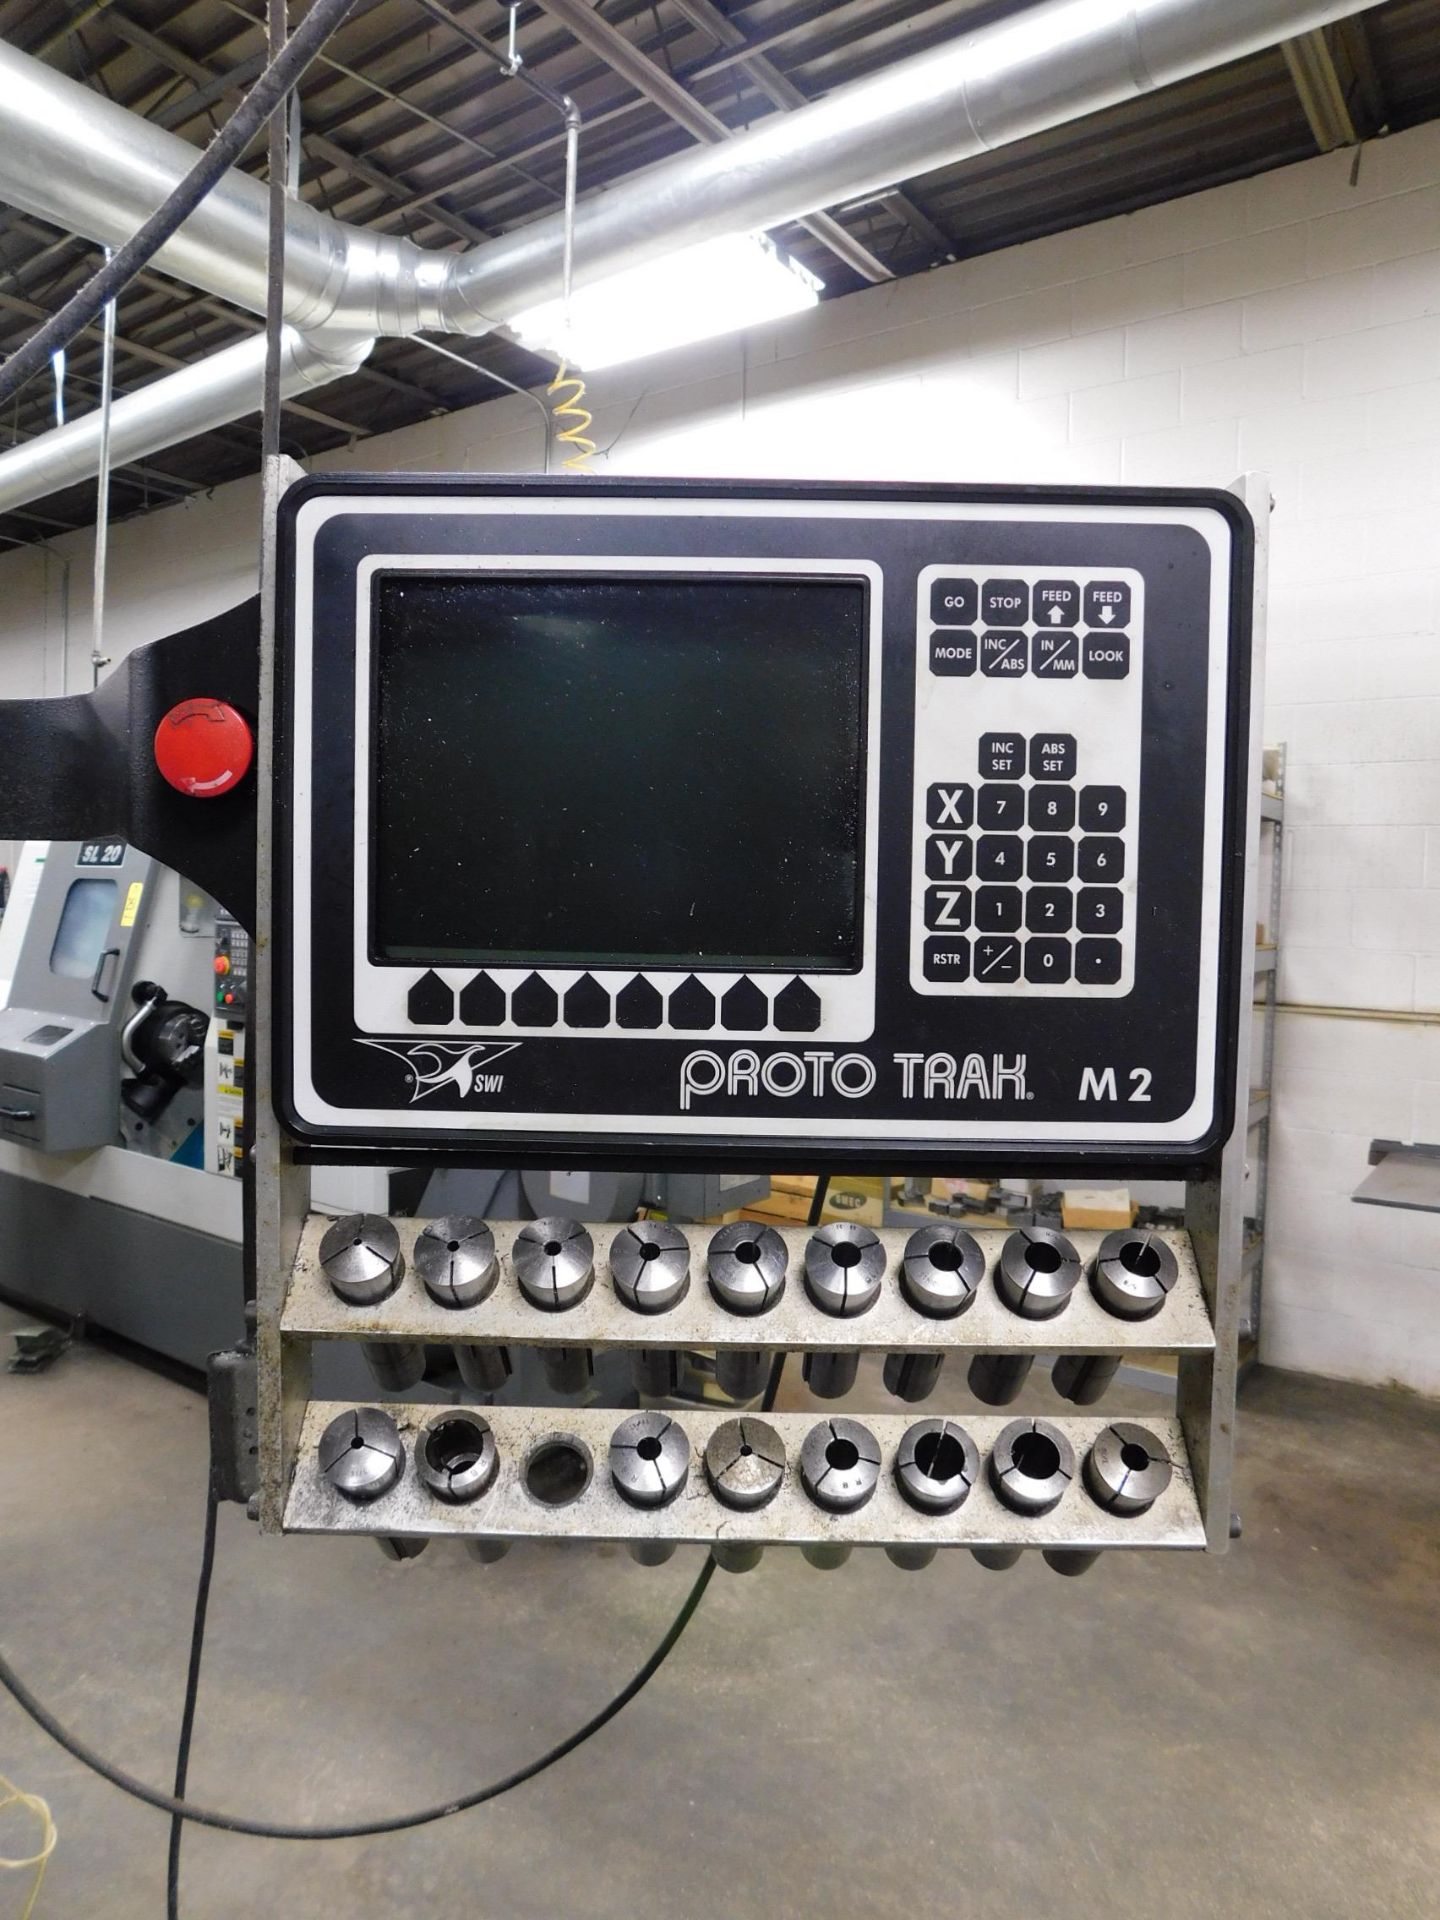 Clausing Kondia Model FV-1 CNC Vertical Mill with Prototrak M2 CNC Control, 2-Axis, 3 HP, Mill s/n - Image 3 of 6